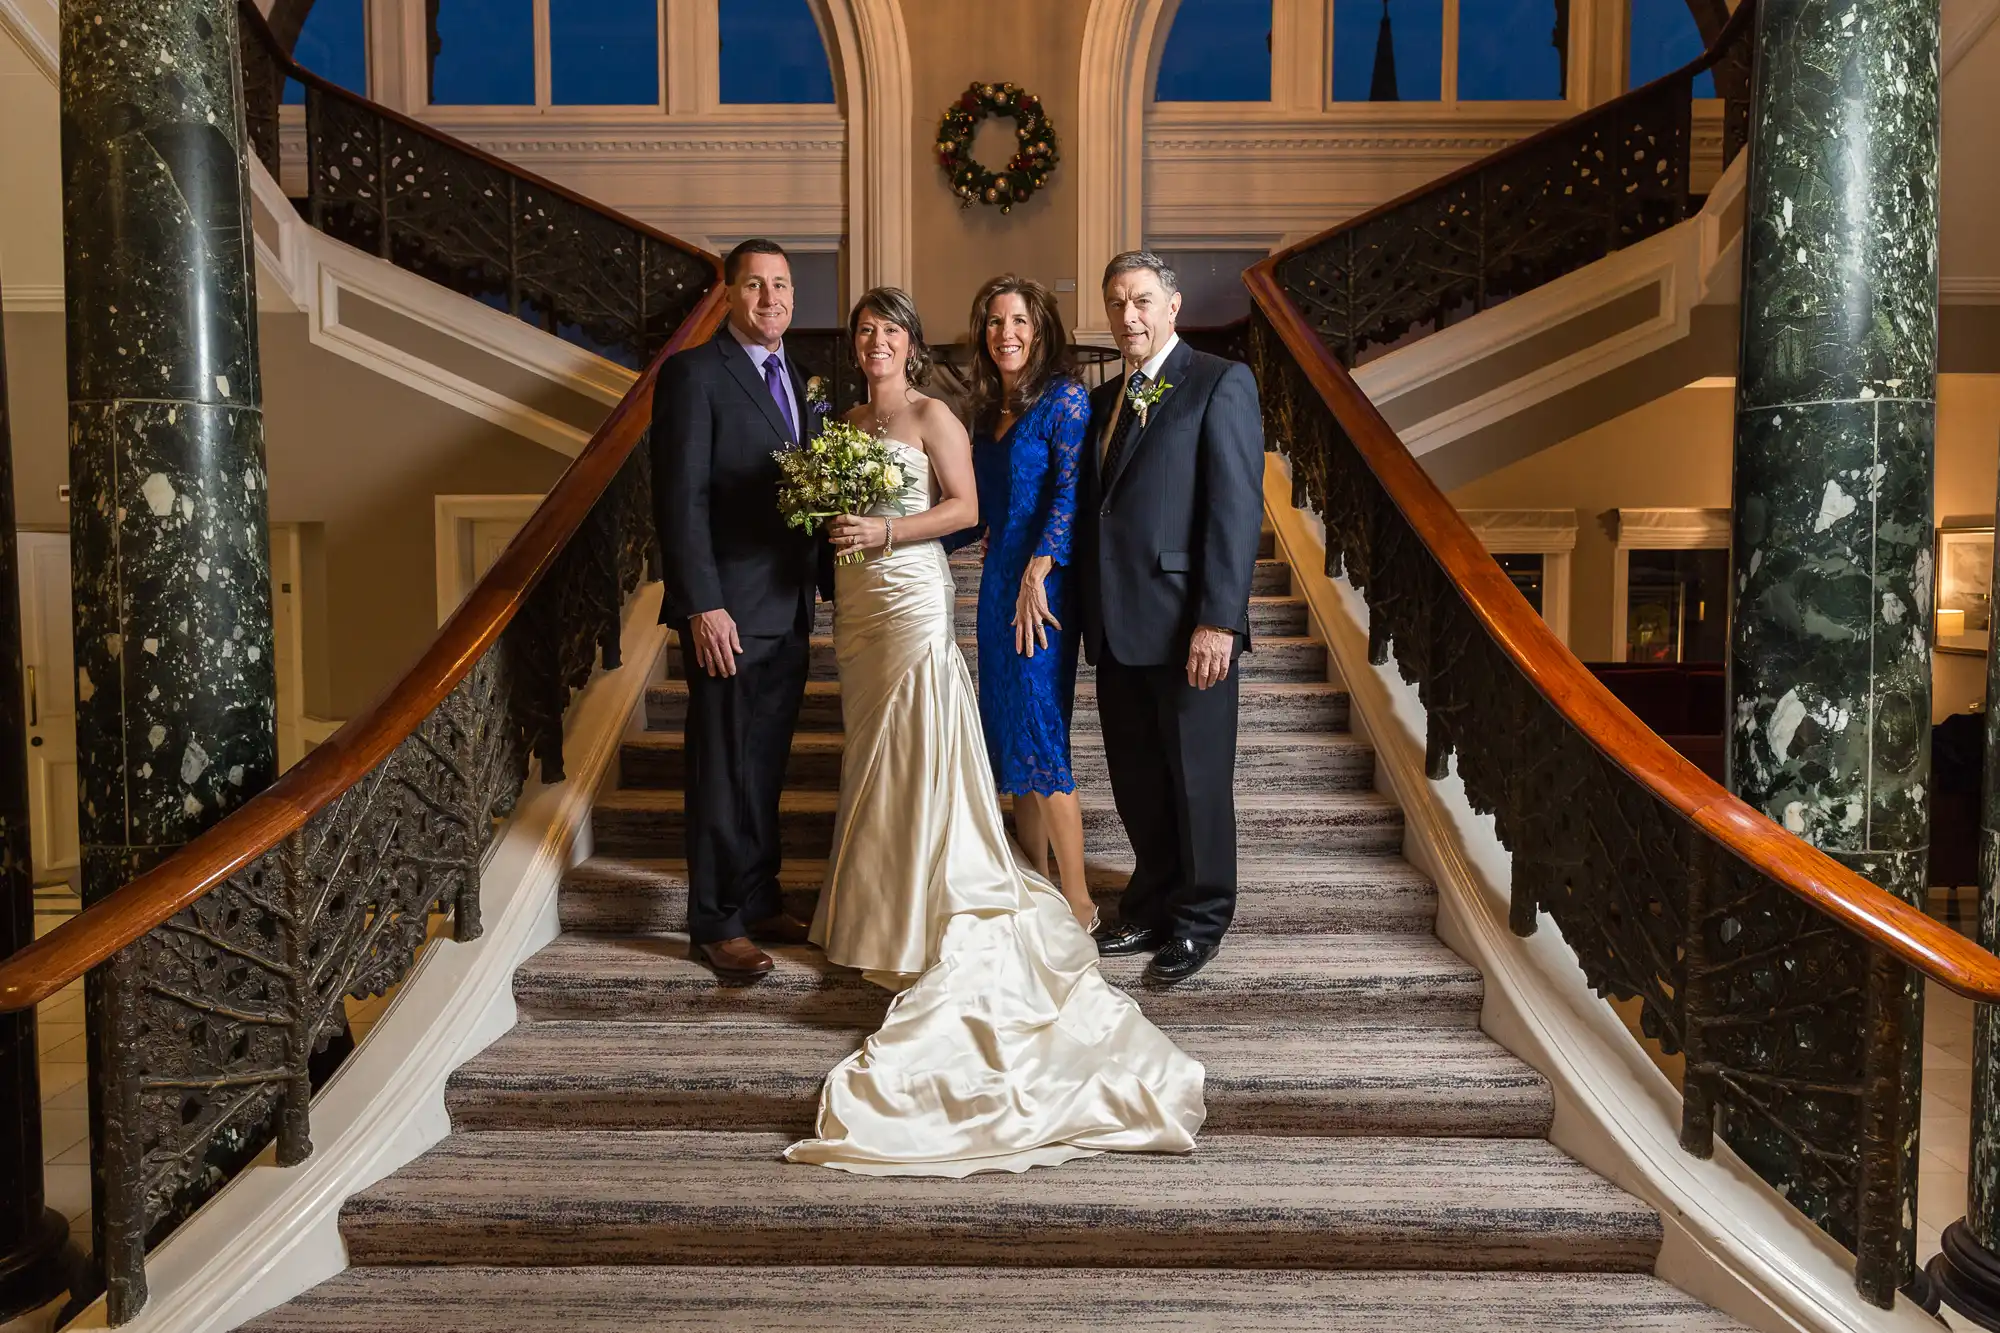 Two couples posing on an elegant staircase with marble railings inside a grand building, dressed in formal wedding attire.